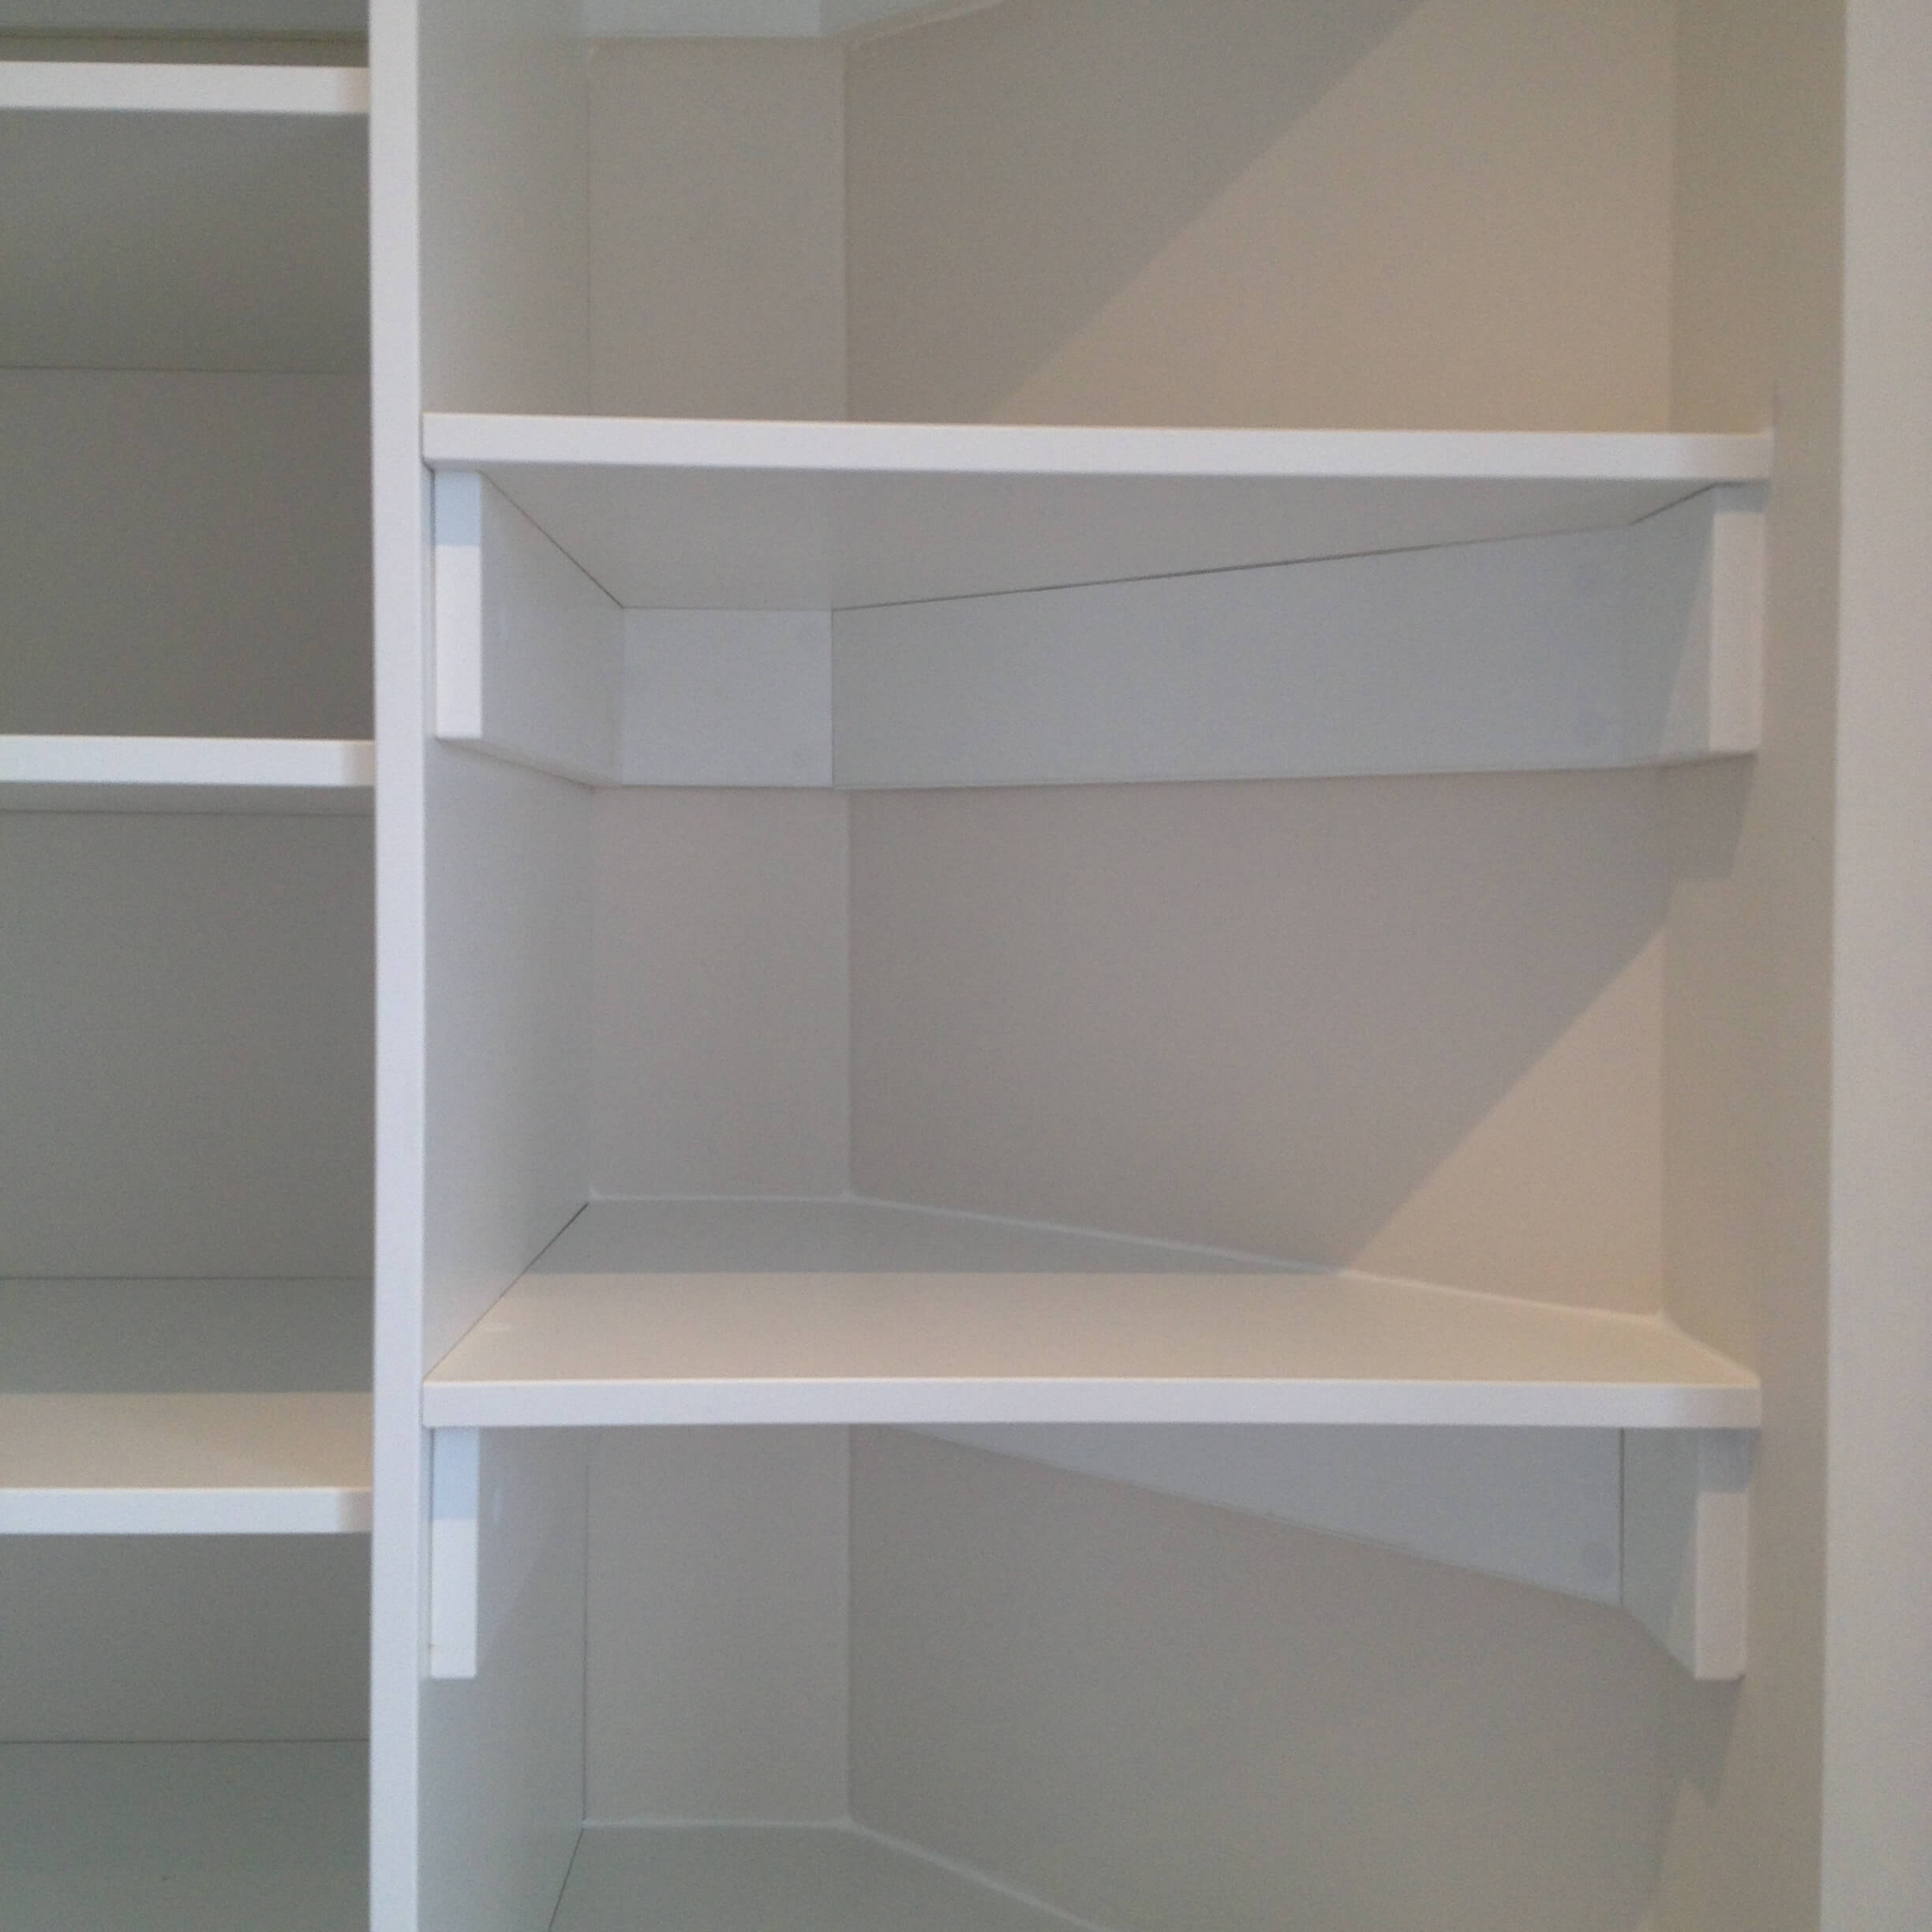 wardrobe fit out, customer shelving in awkward space